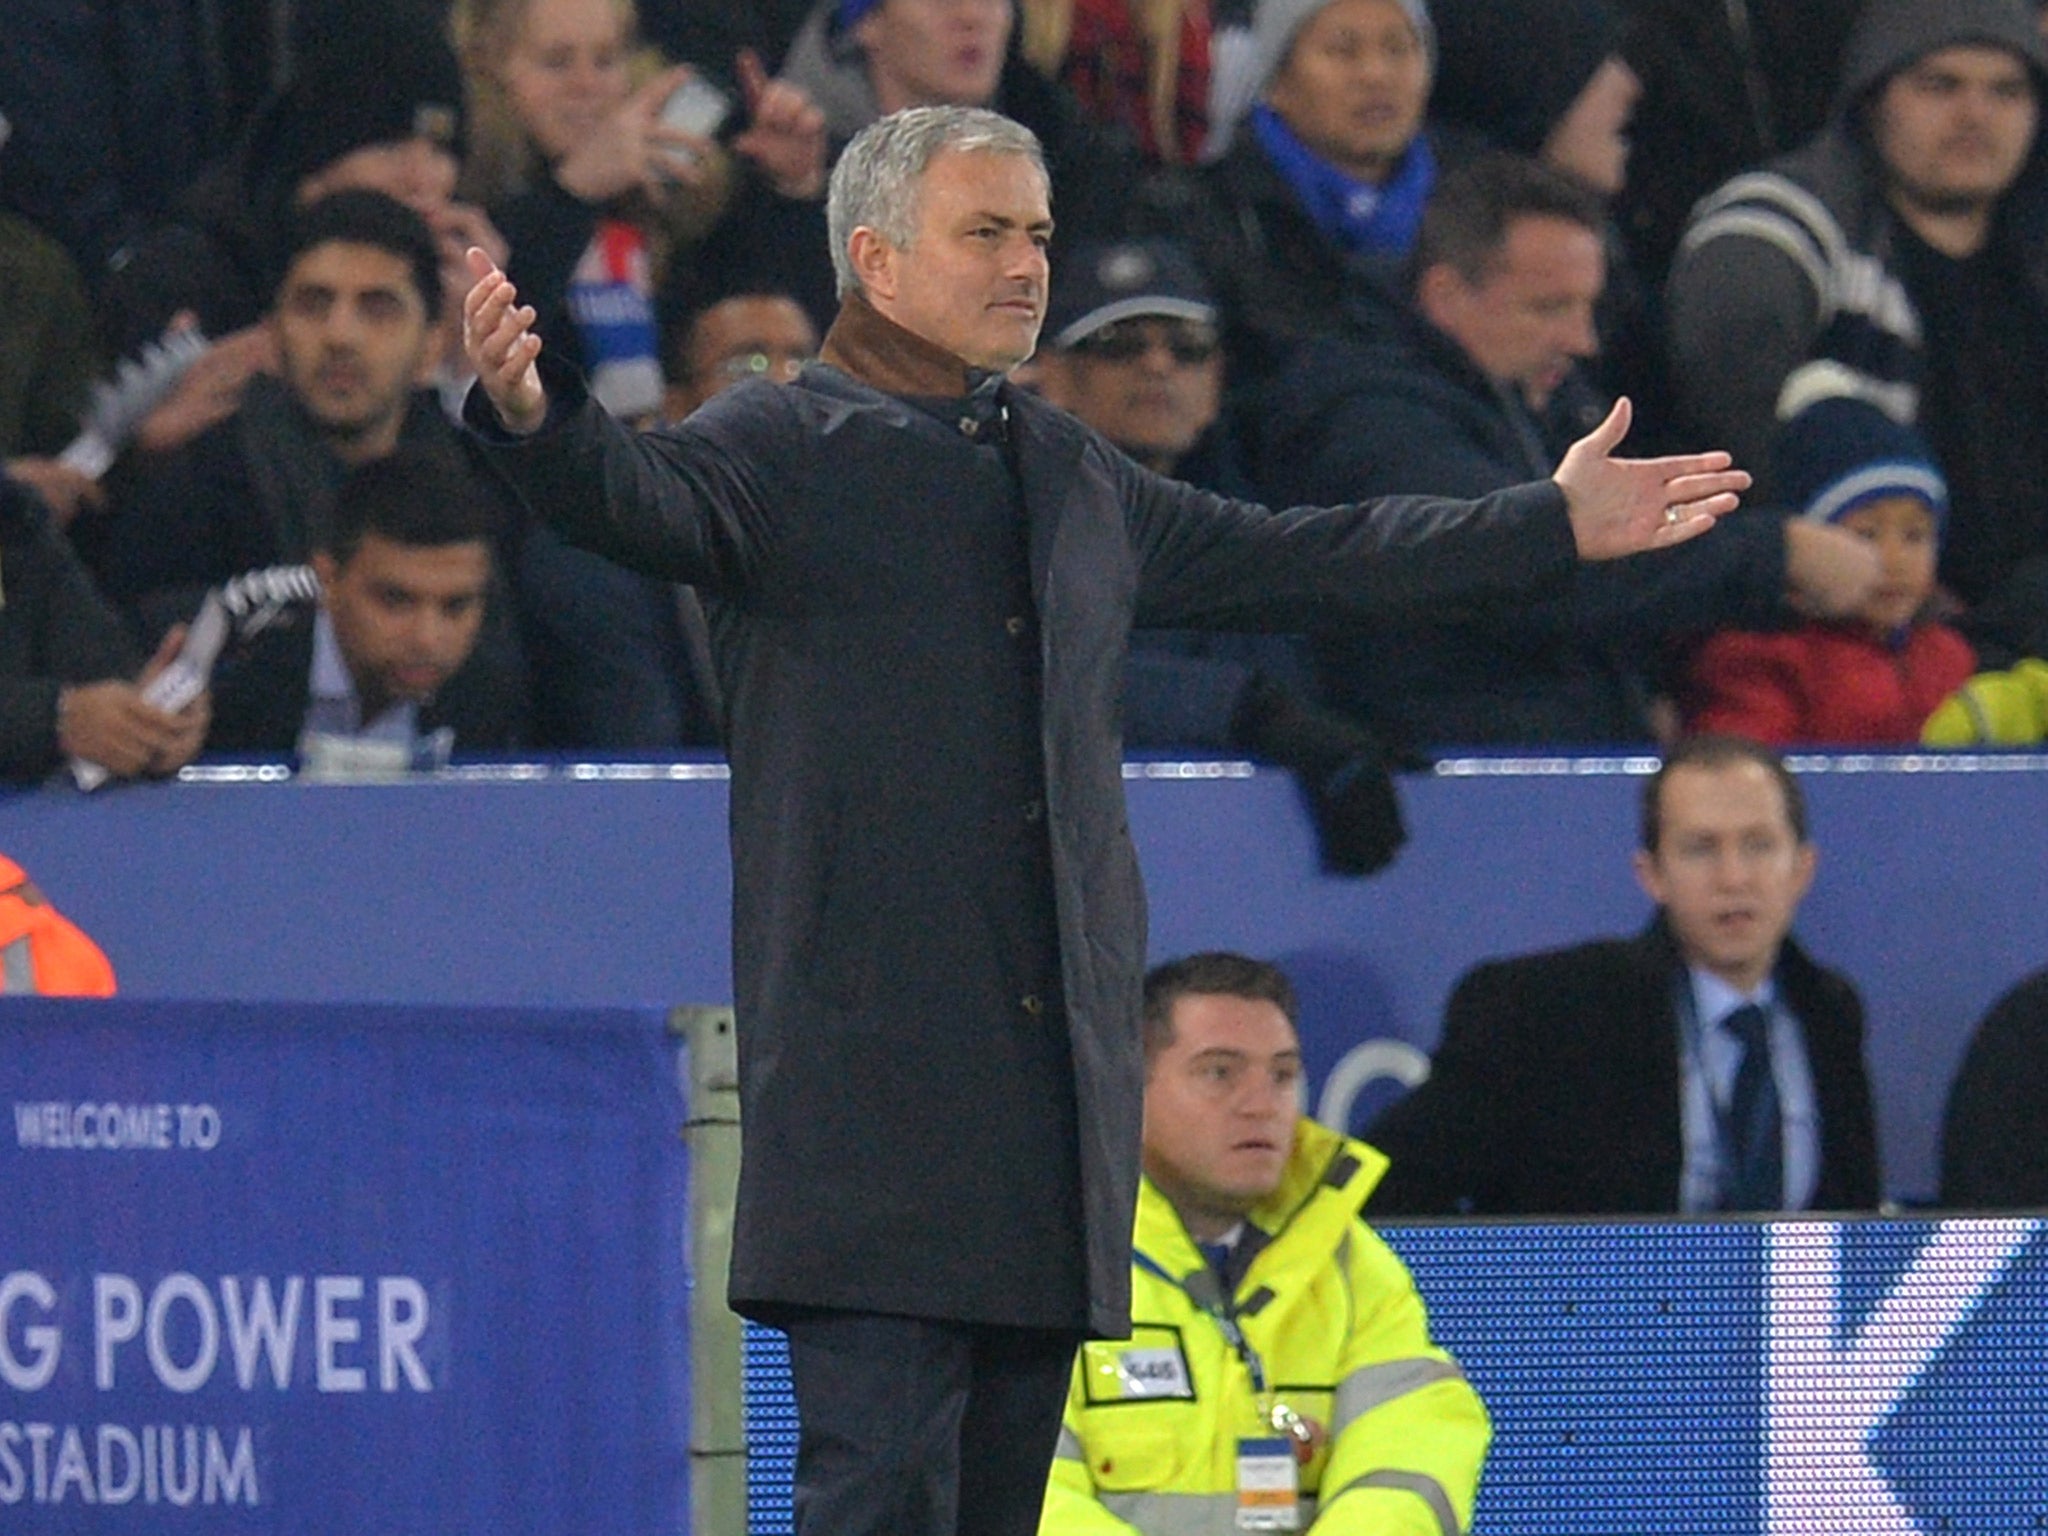 Jose Mourinho is reported to have agreed a deal to become Manchester United's new manager